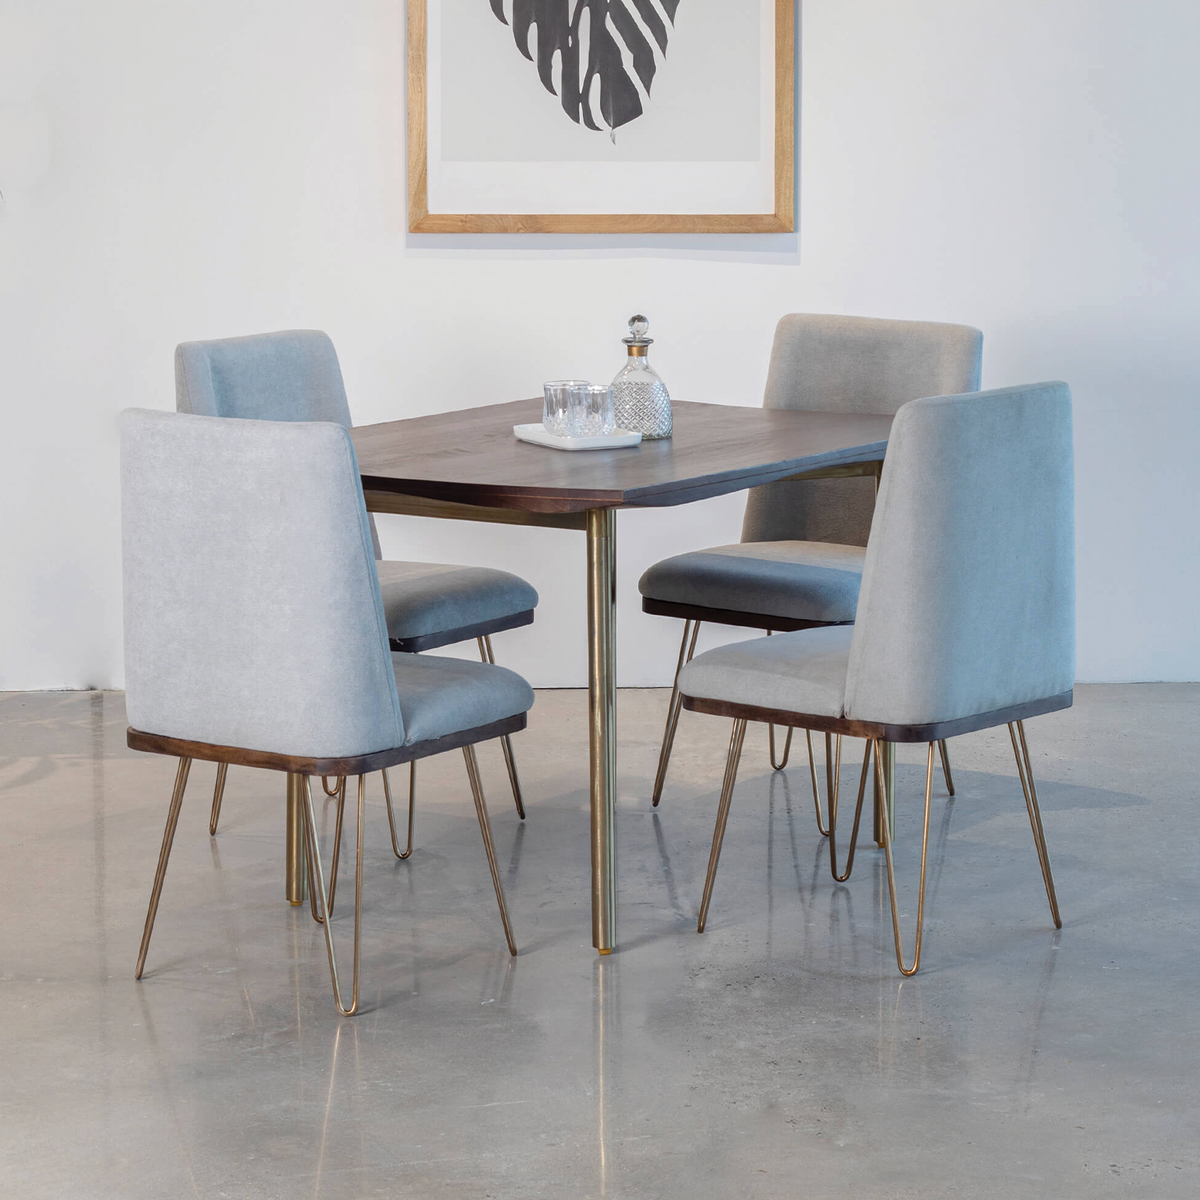 Barcelona Dining Table With 4 Without Arm Chairs